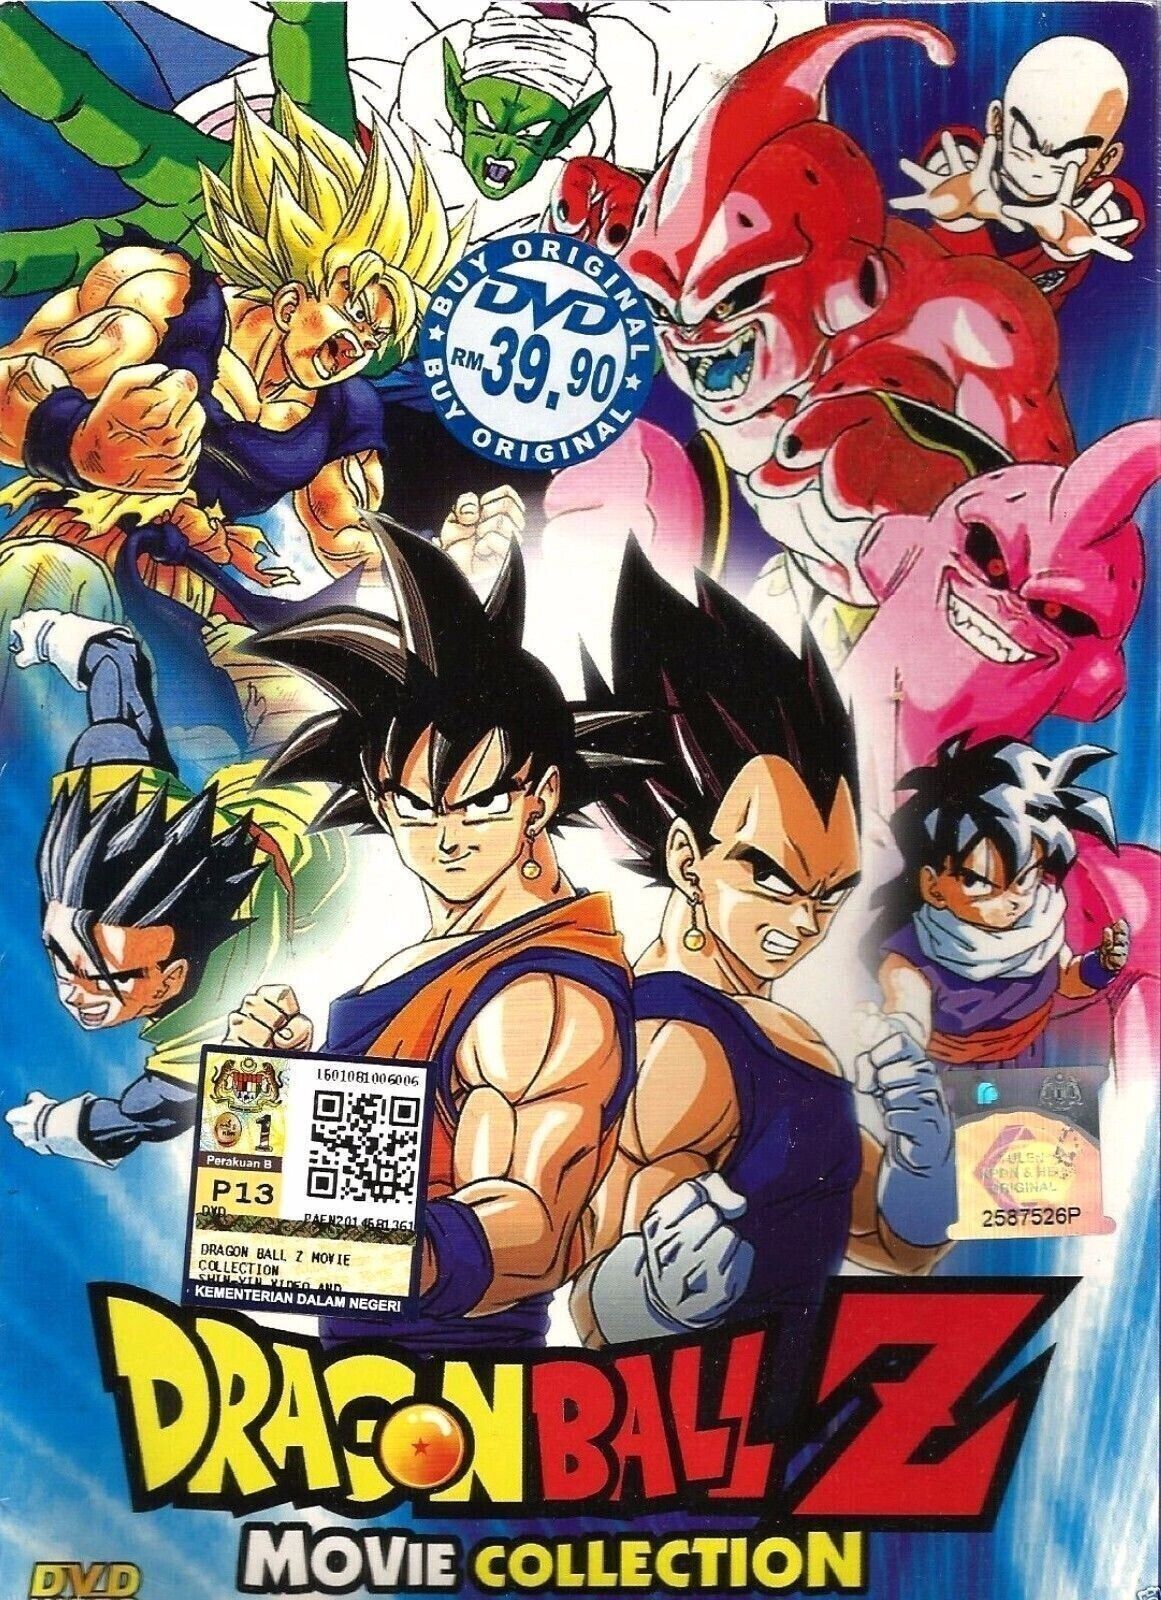 cheryl maddox recommends Dragonball Z Online Movies